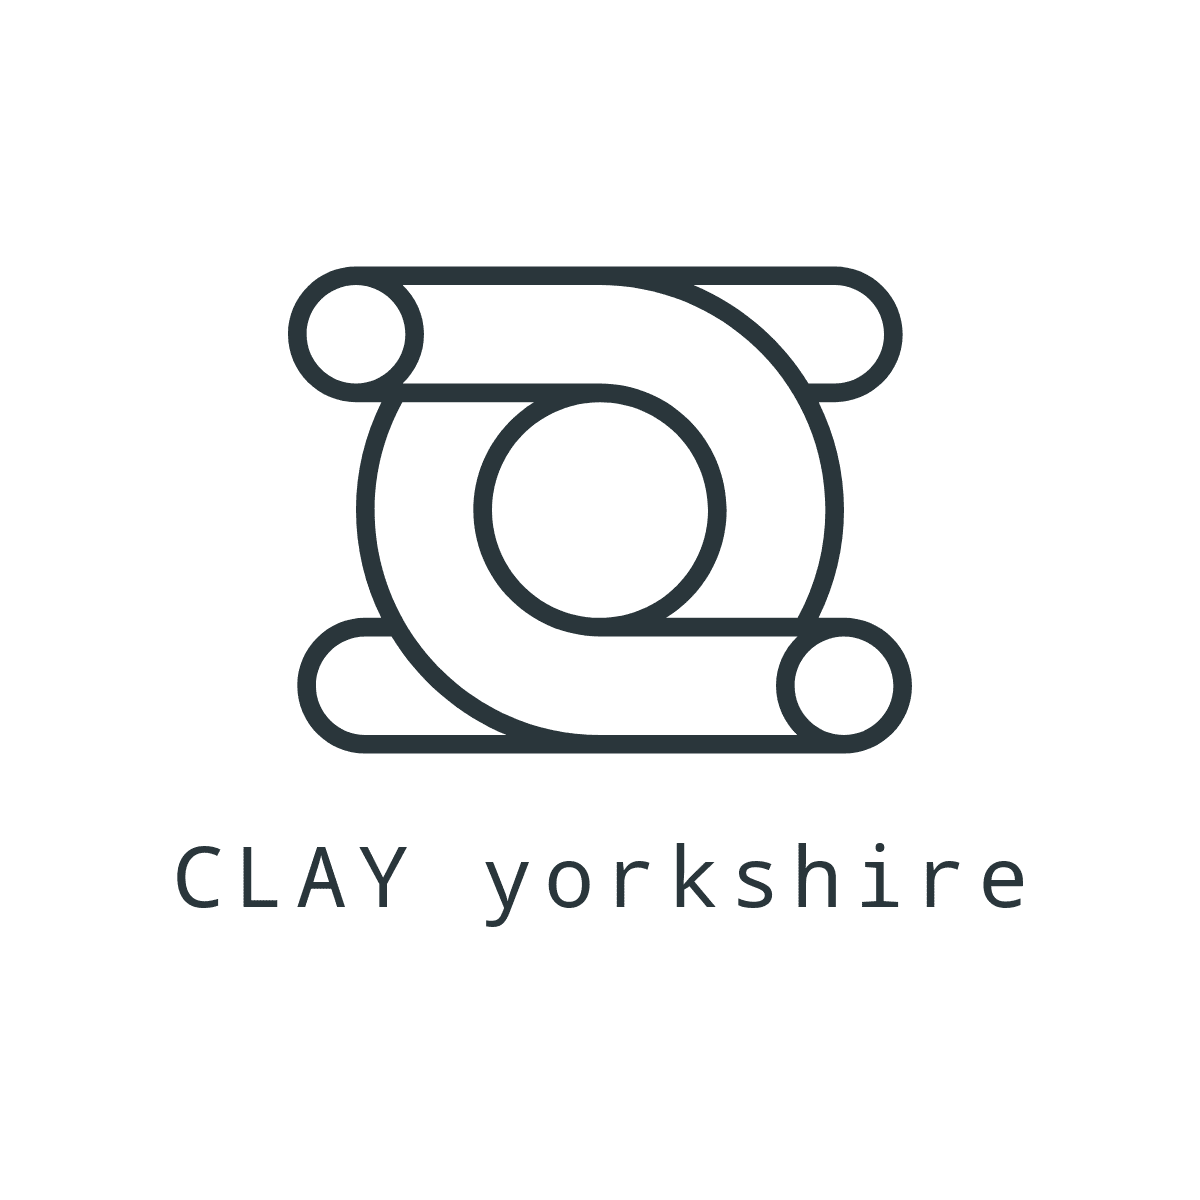 CLAY Yorkshire